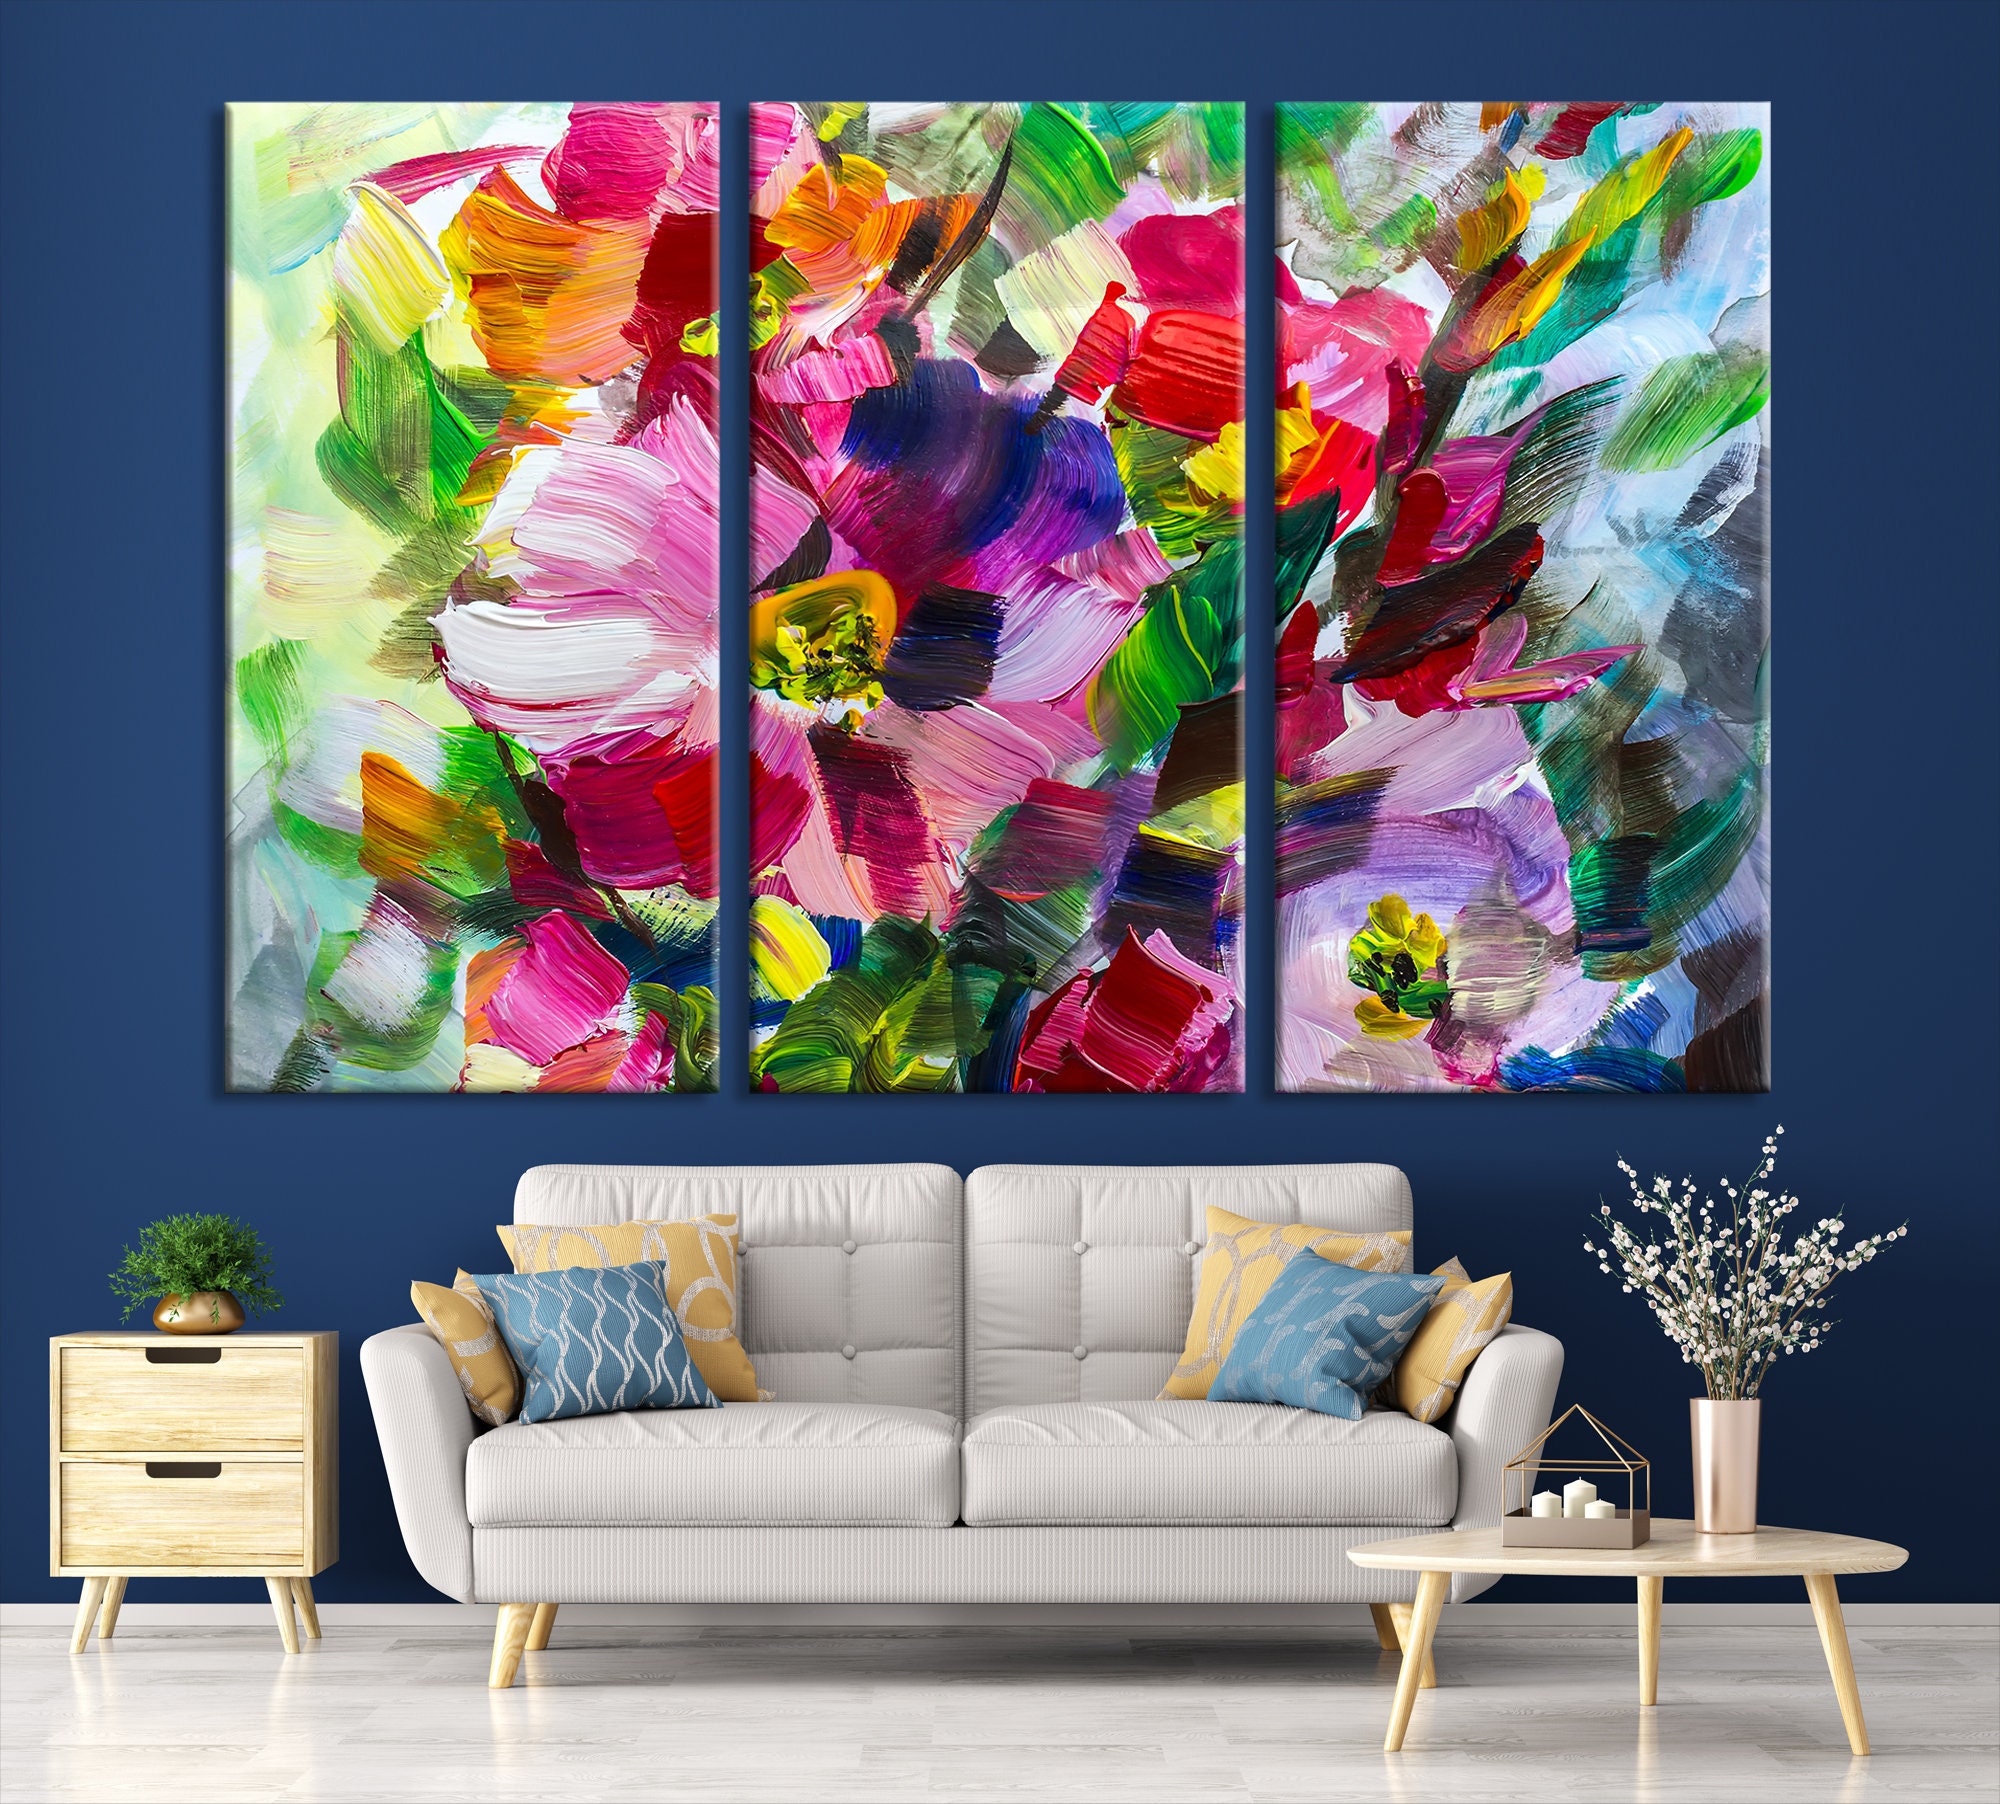 Marvellous Flower Abstract Painting Large 3 Panel Canvas | Etsy